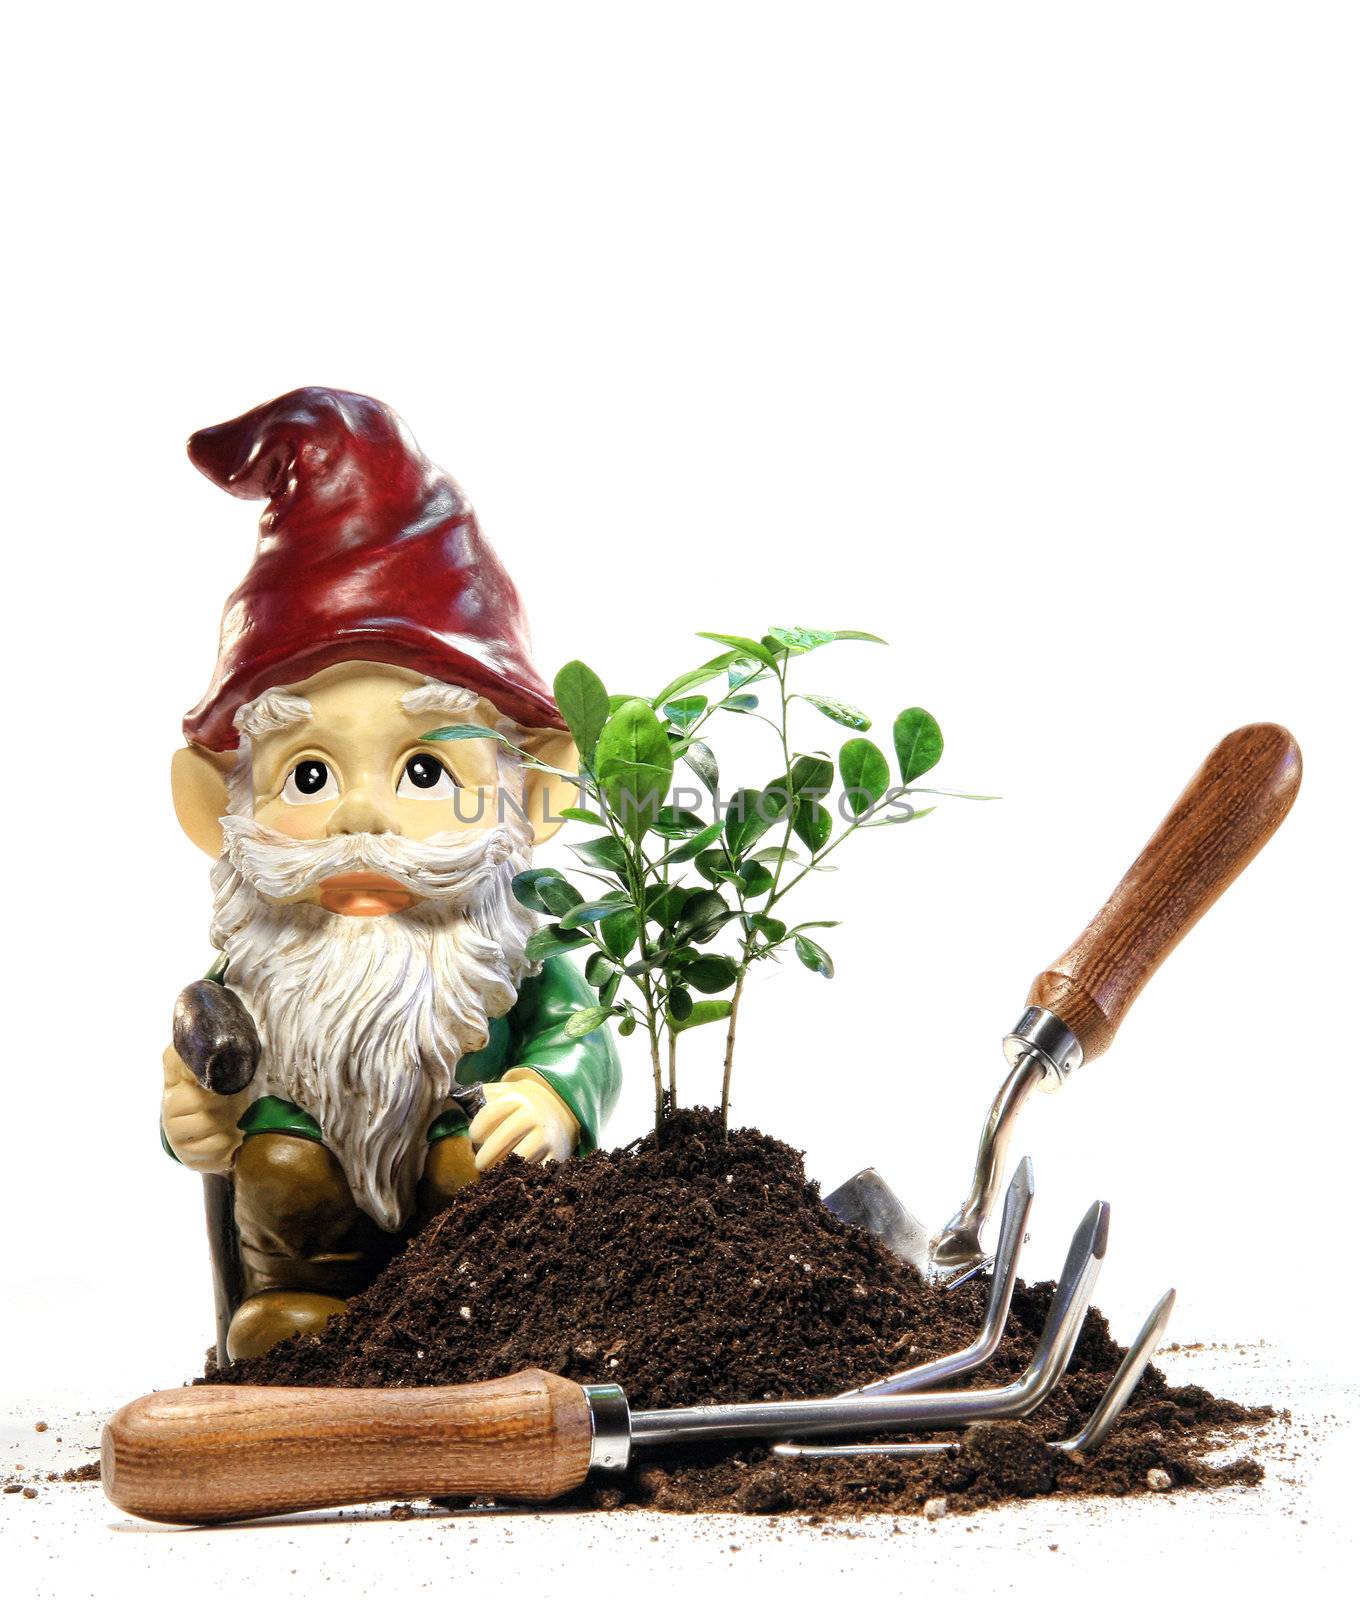 Garden gnome and tools for spring planting by Sandralise